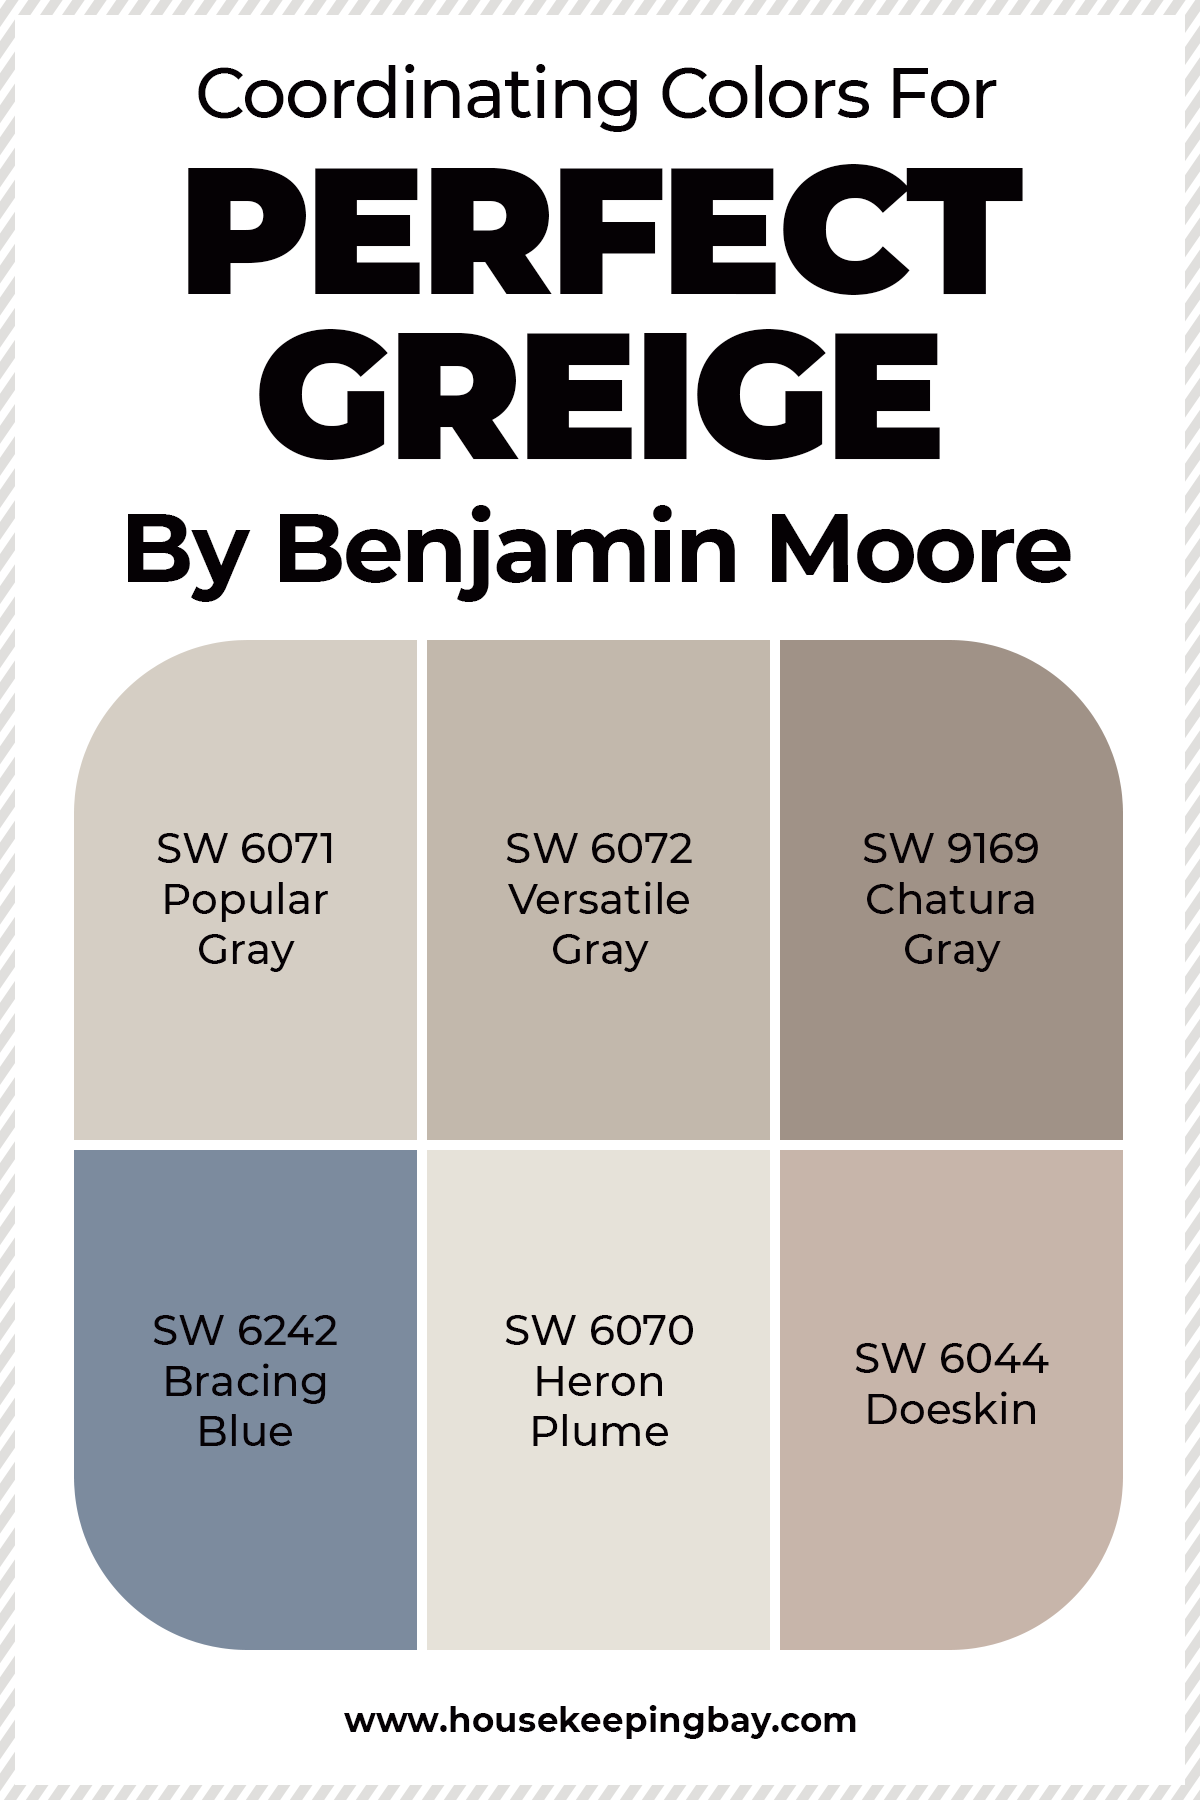 Coordinating Colors For Perfect Greige